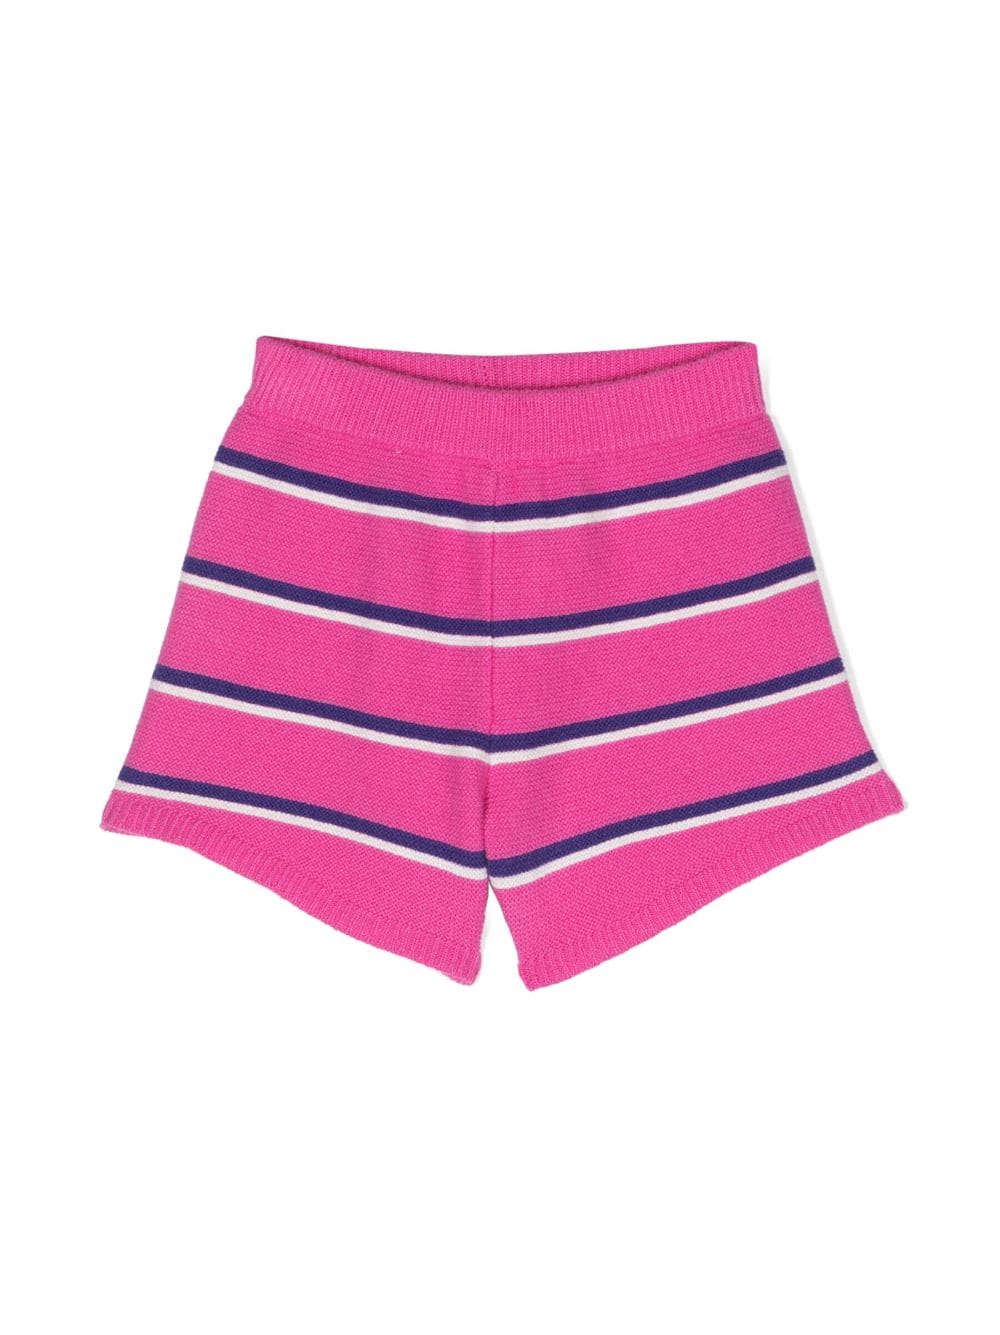 PUCCI Junior striped knitted shorts - Pink